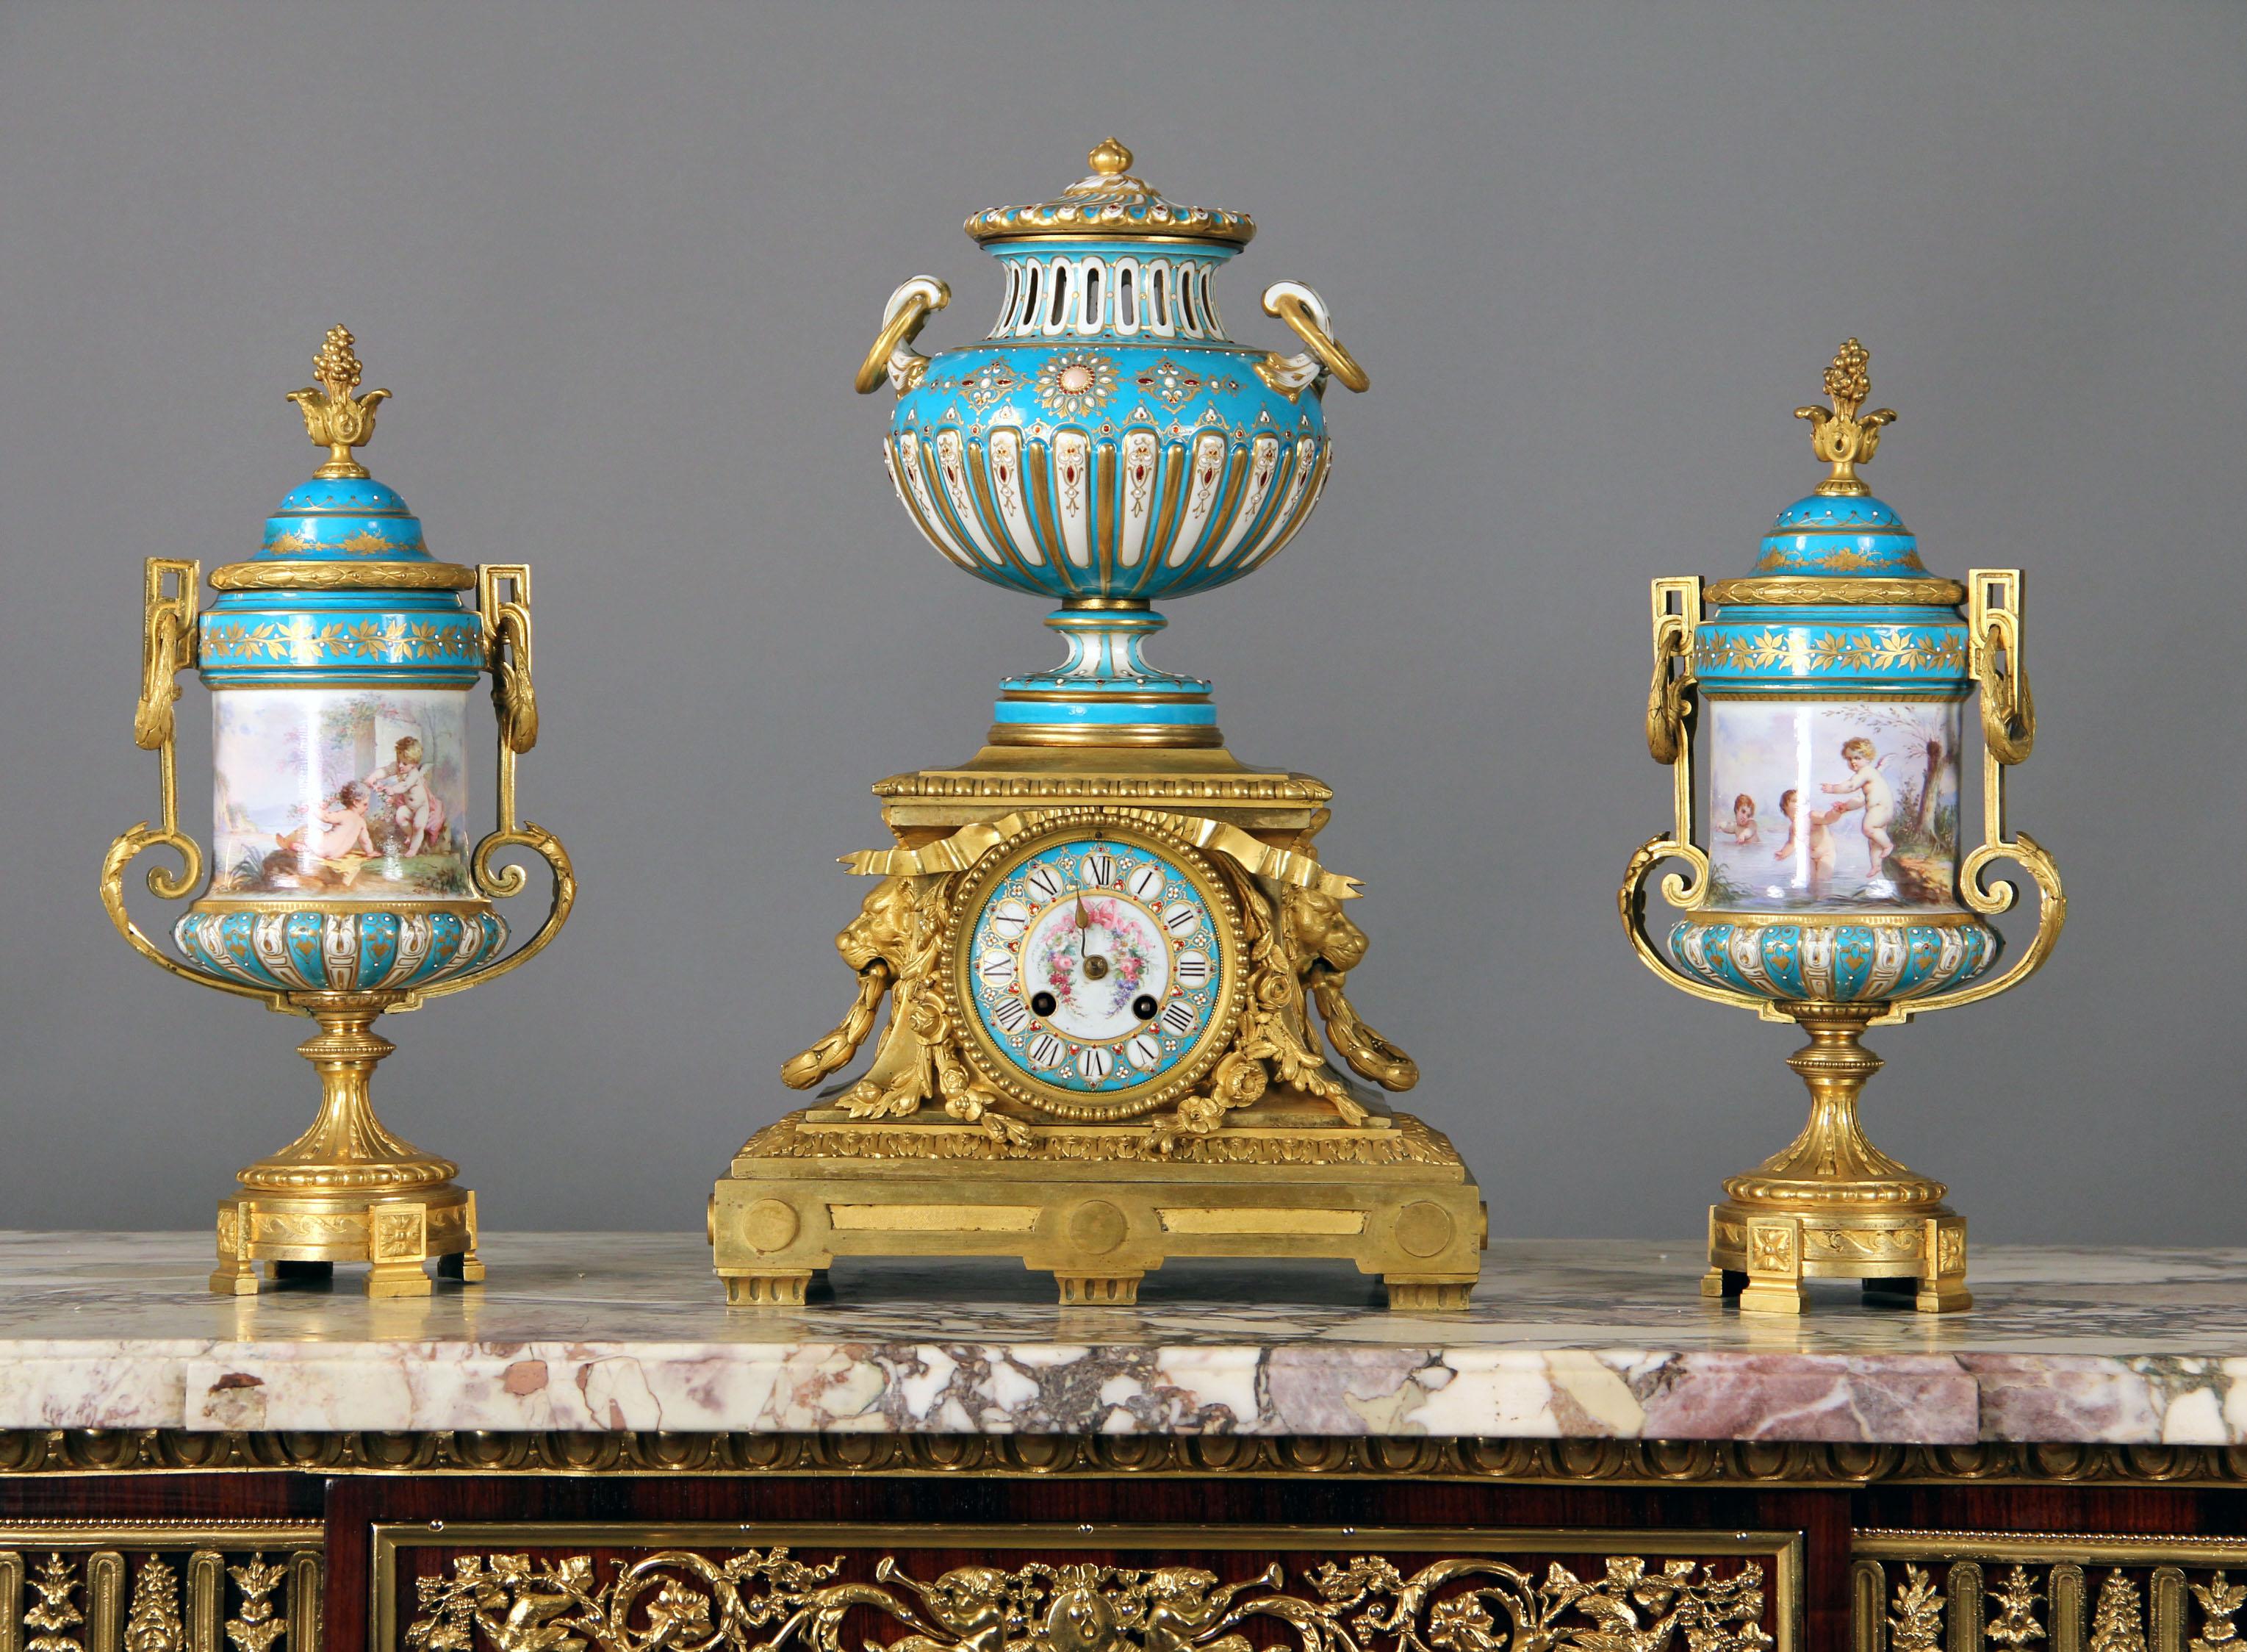 Late 19th century gilt bronze and turquoise Sèvres porcelain 'Jeweled' three-piece clock set

The clock surmounted by a covered urn, the clock case flanked by lion masks, en suite with a pair of vases with putti playing near water.

In late